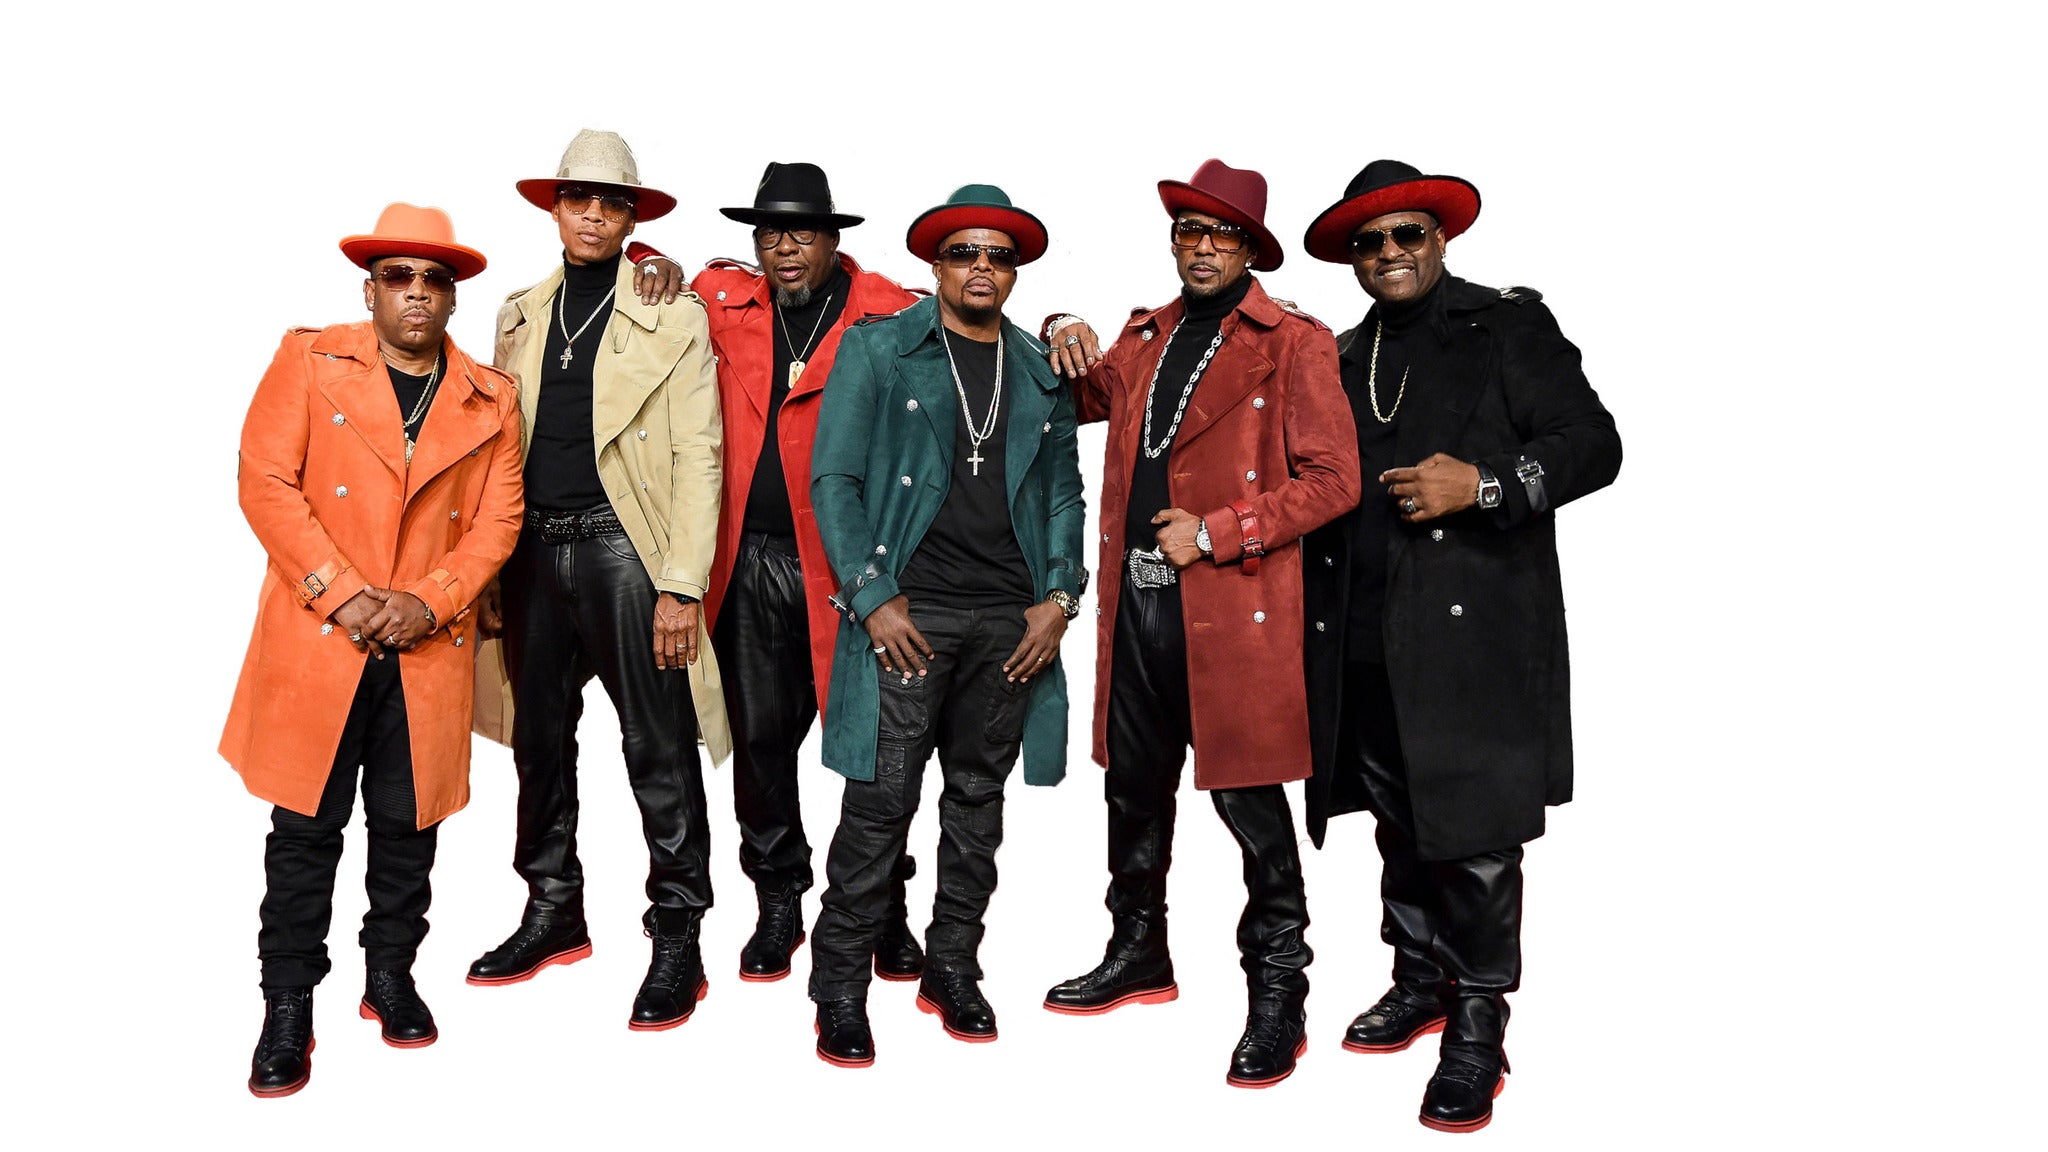 New Edition: Legacy Tour with Keith Sweat and Guy presale code for real tickets in Atlantic City